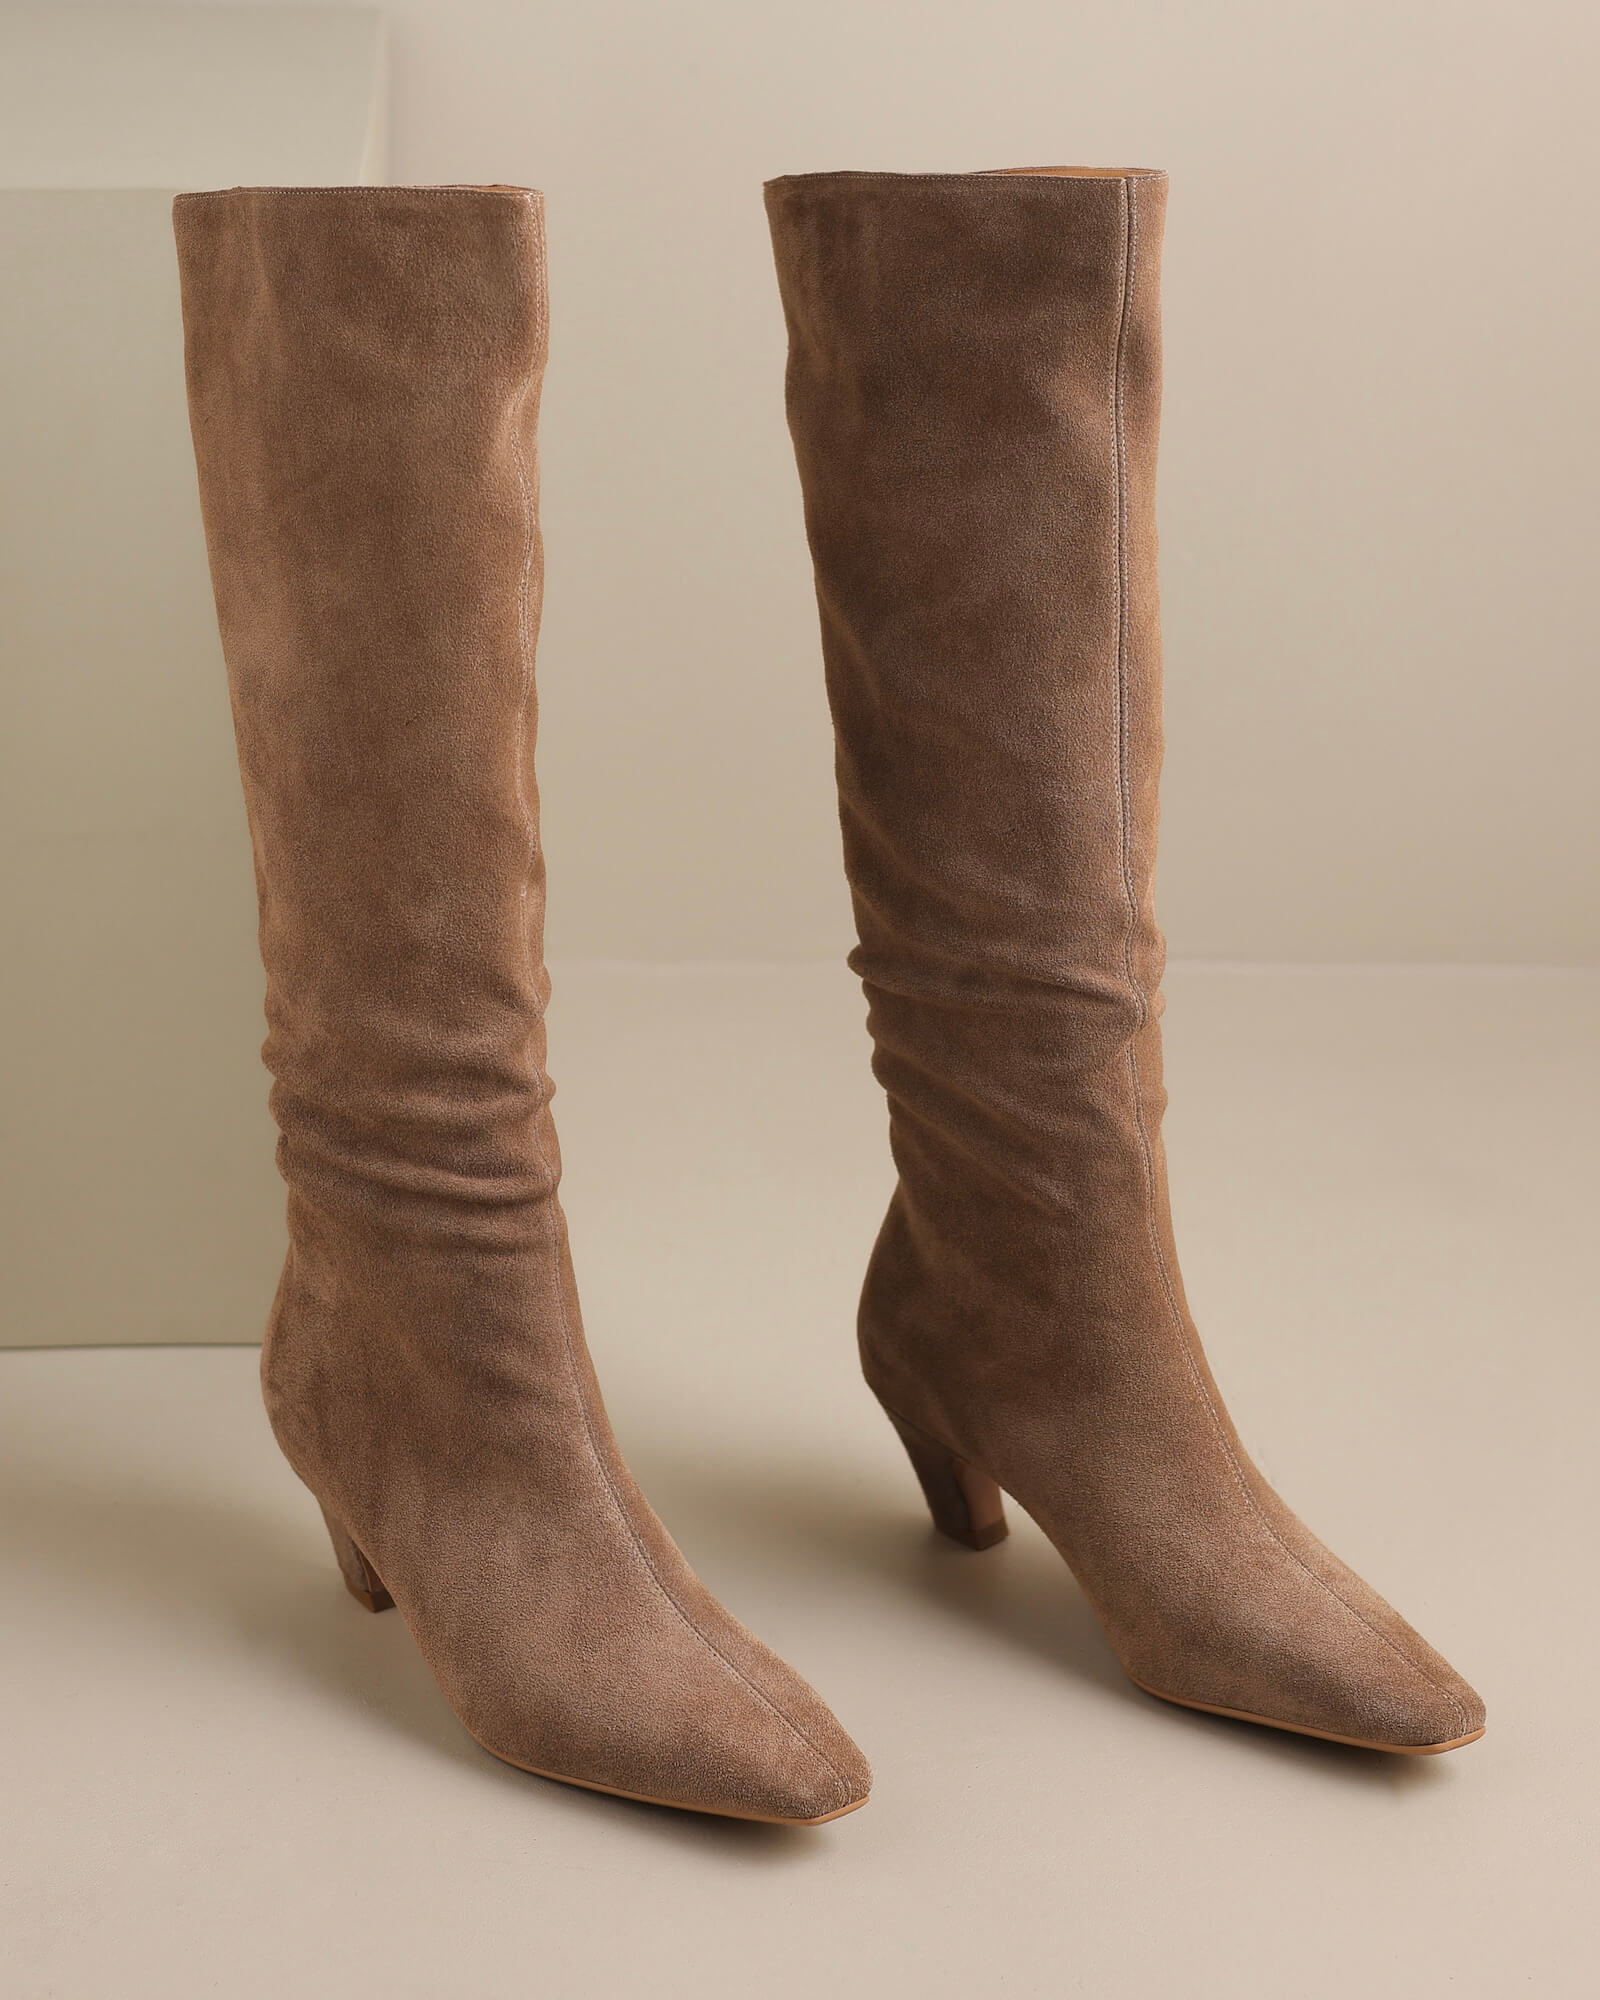 Miolo-suede-knee-high-boots-khaki-1